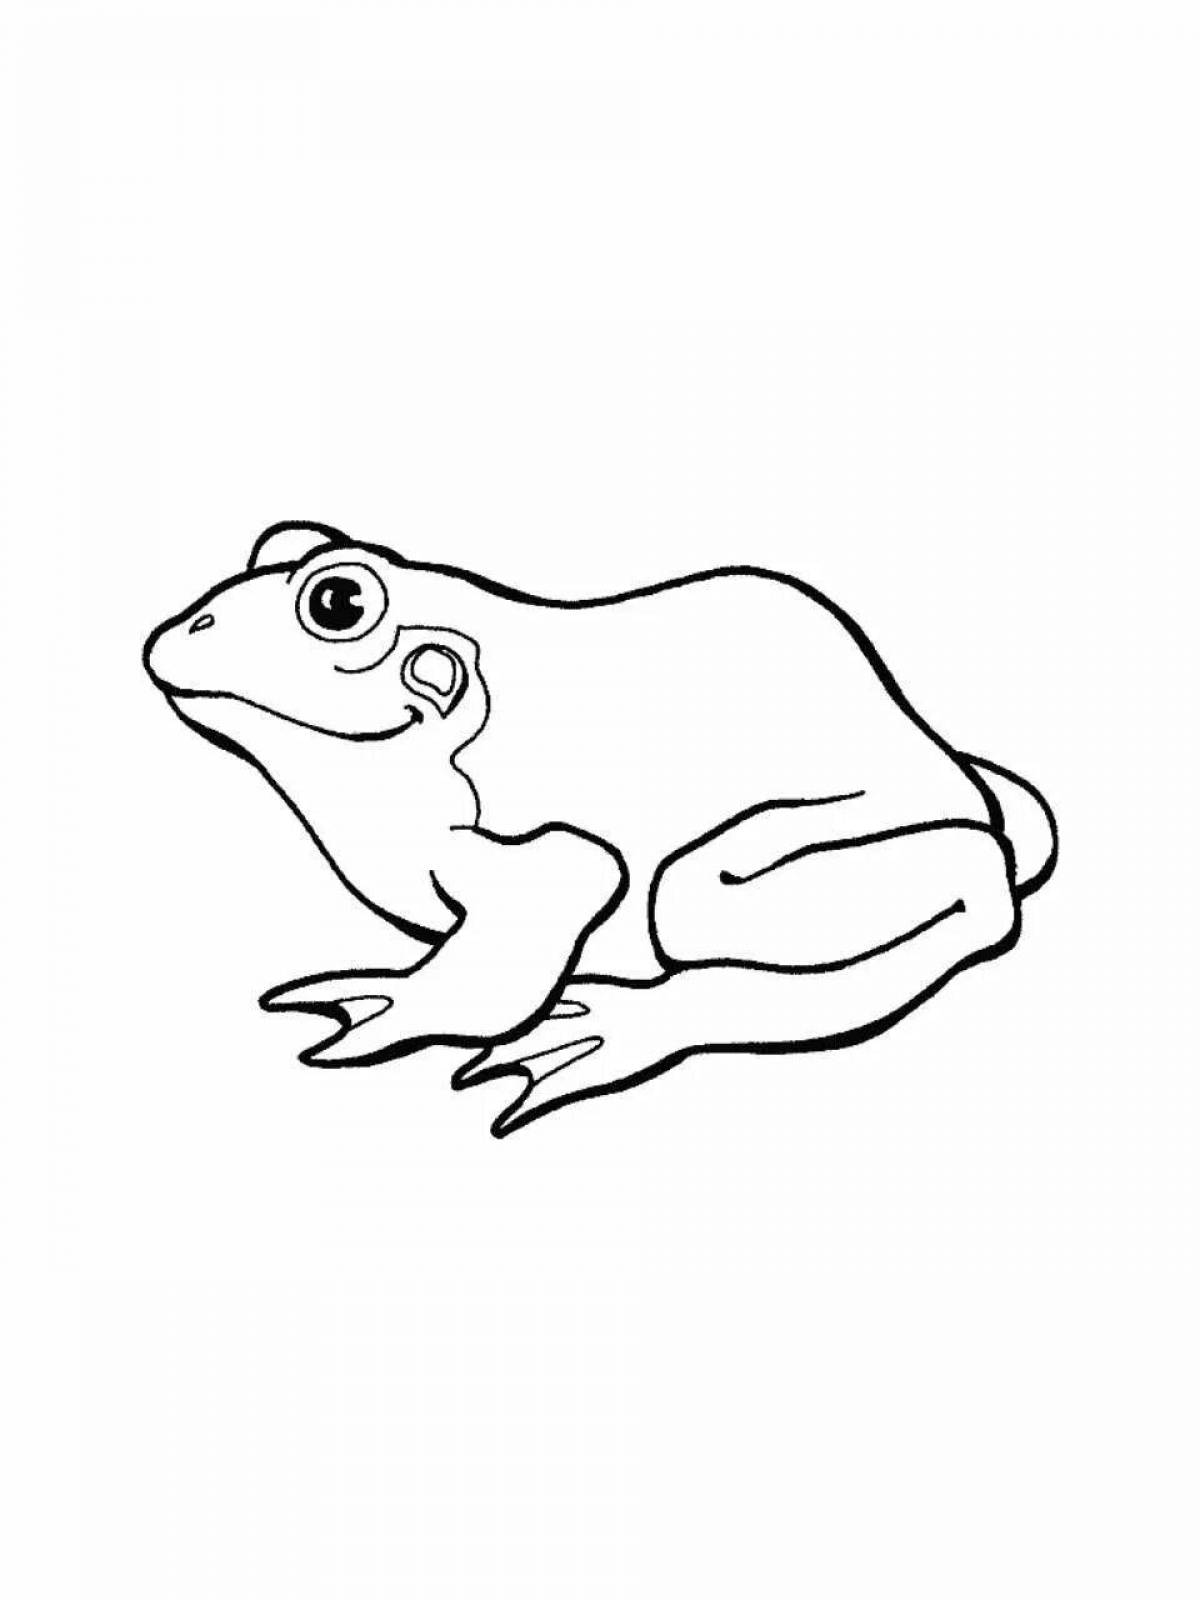 Adorable tree frog coloring book